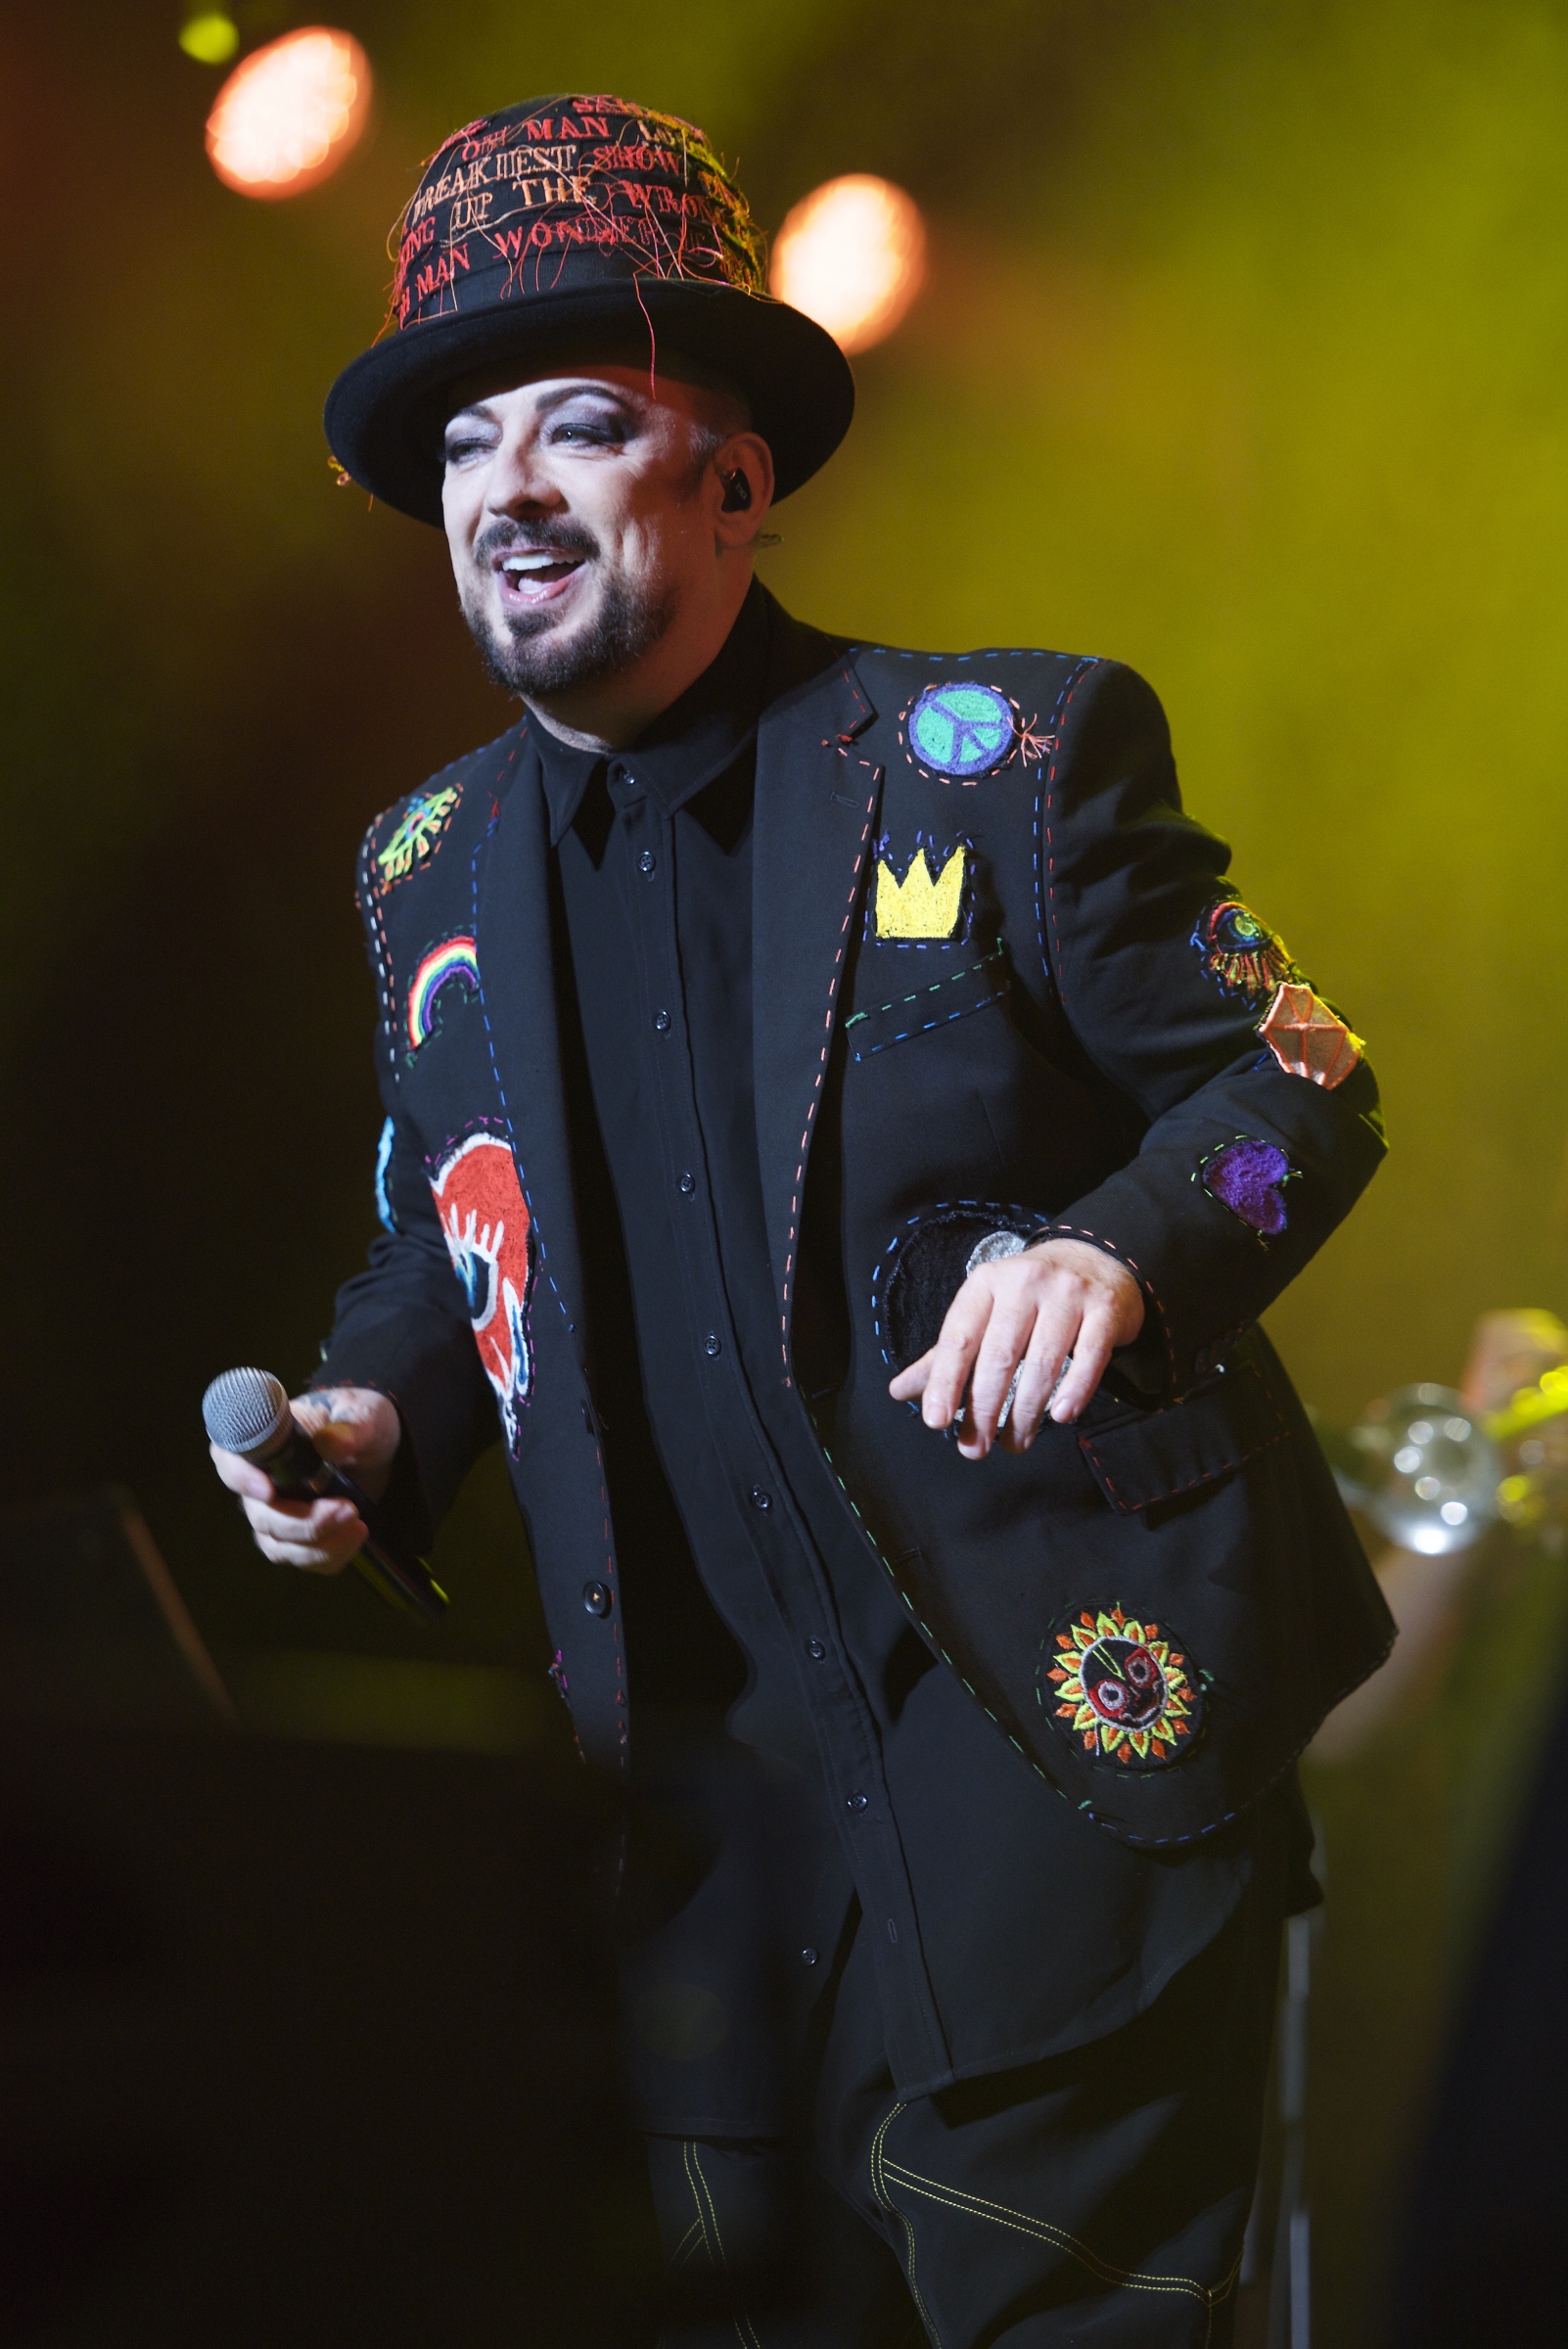 Boy George and Culture Club taken at Scarborough Open Air Theatre. Marc McGarraghy (www.yellowmustang.co.uk)